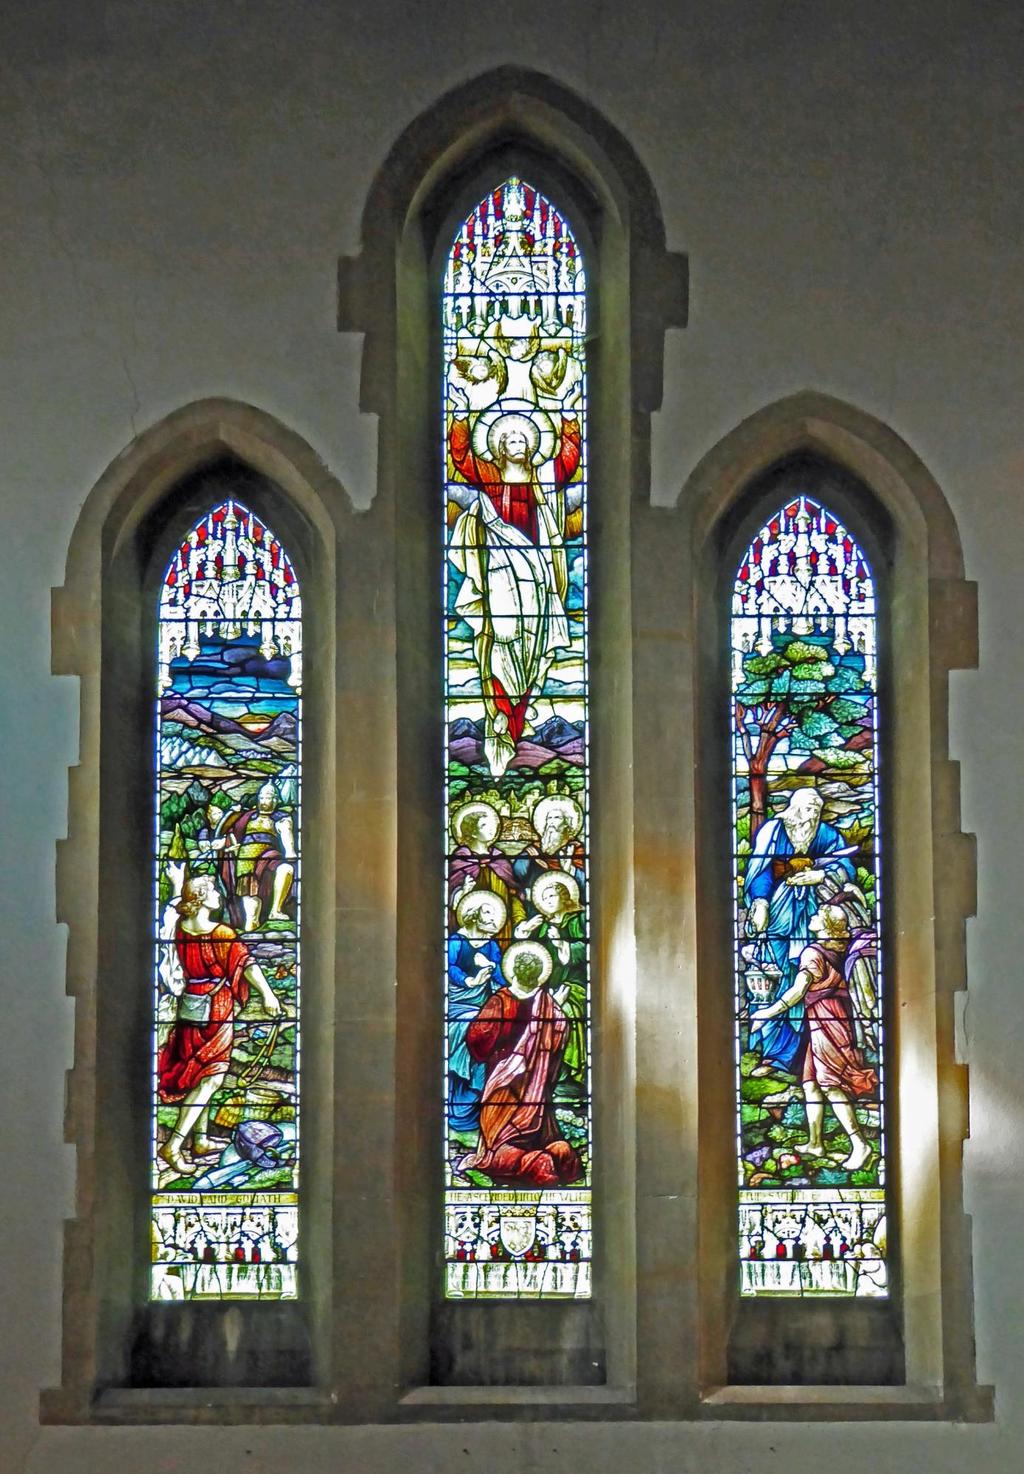 The beautiful West Window, shown below, was created in memory of 2 nd Lt William Trimmer, and its